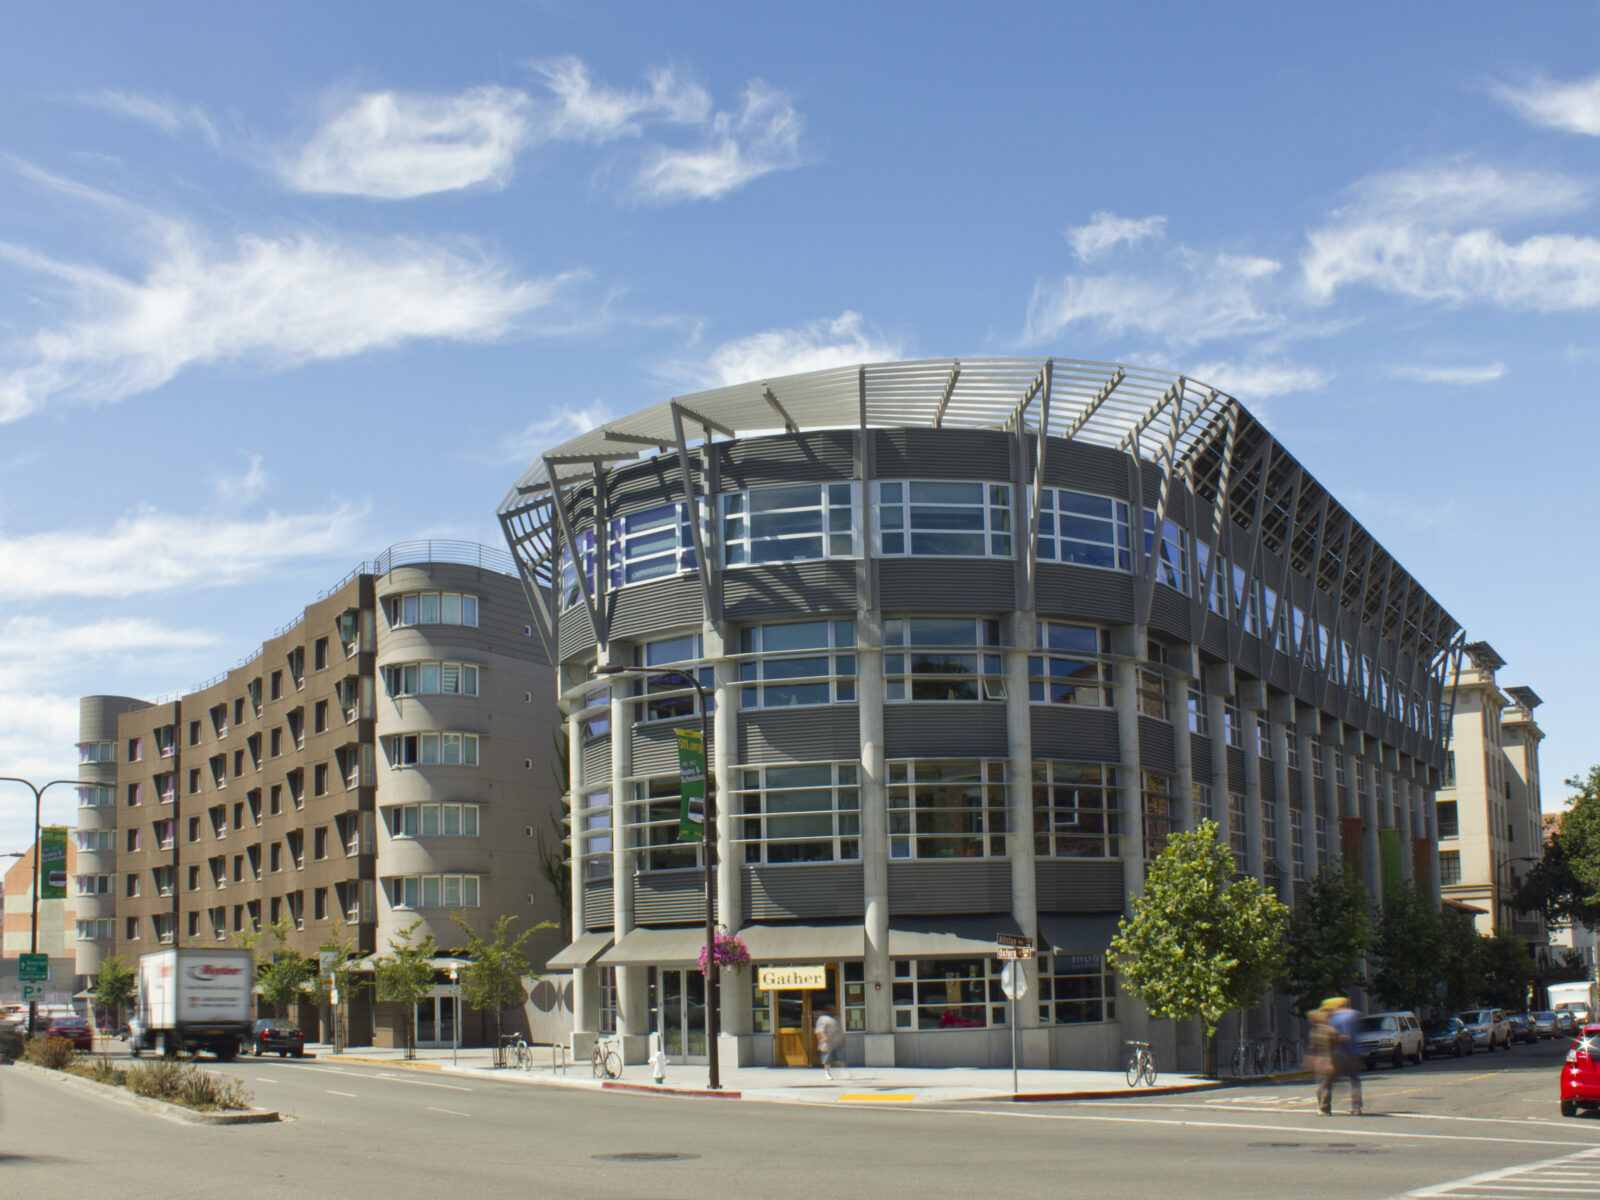 Front of the Brower Center building, as seen from the street